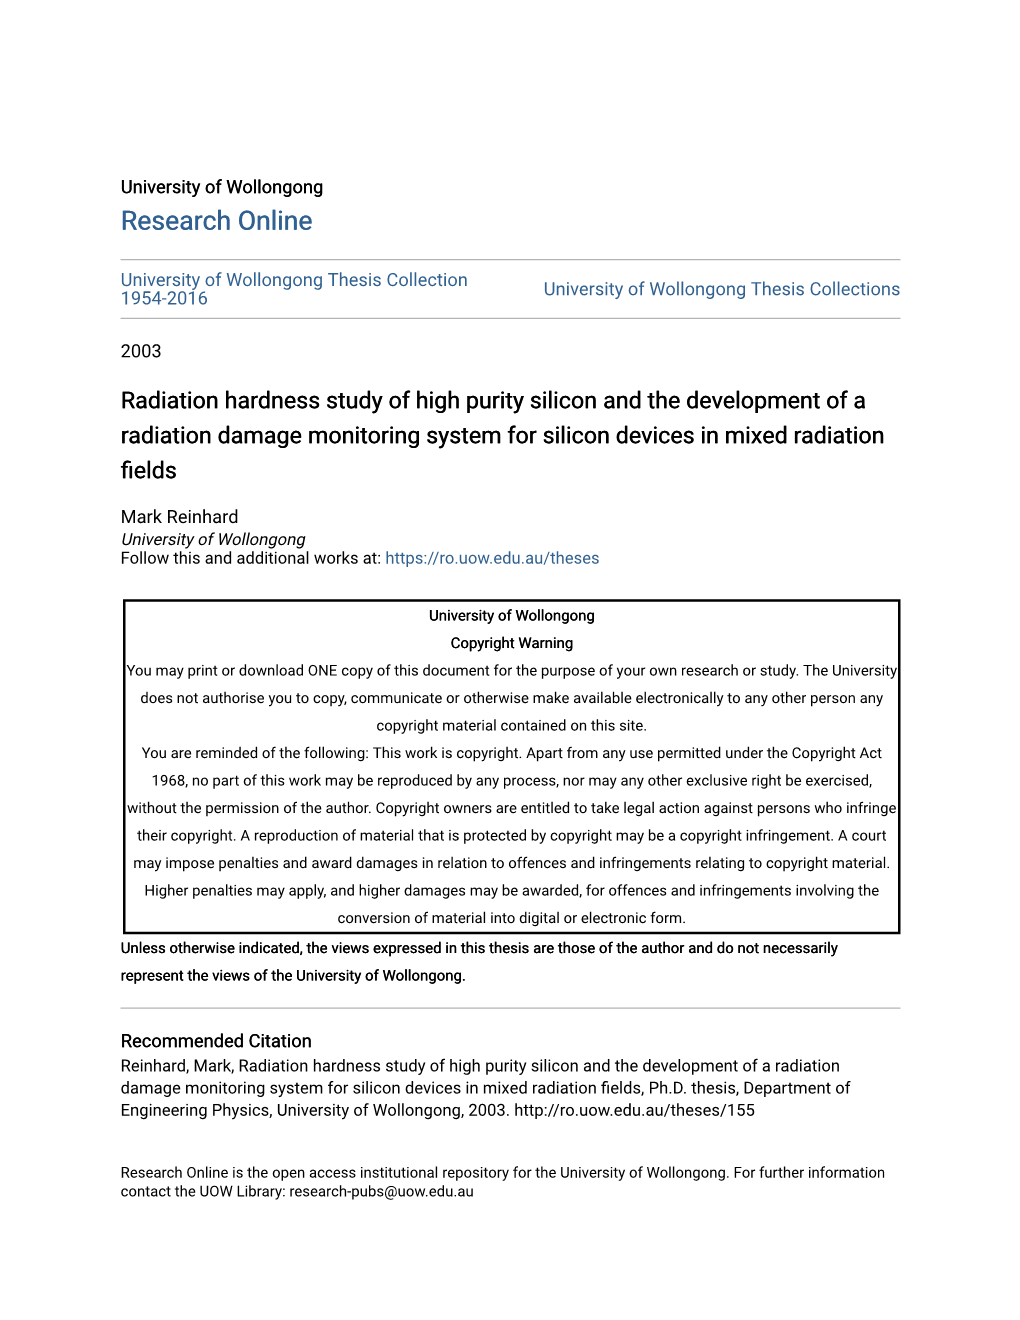 Radiation Hardness Study of High Purity Silicon and the Development of a Radiation Damage Monitoring System for Silicon Devices in Mixed Radiation Fields